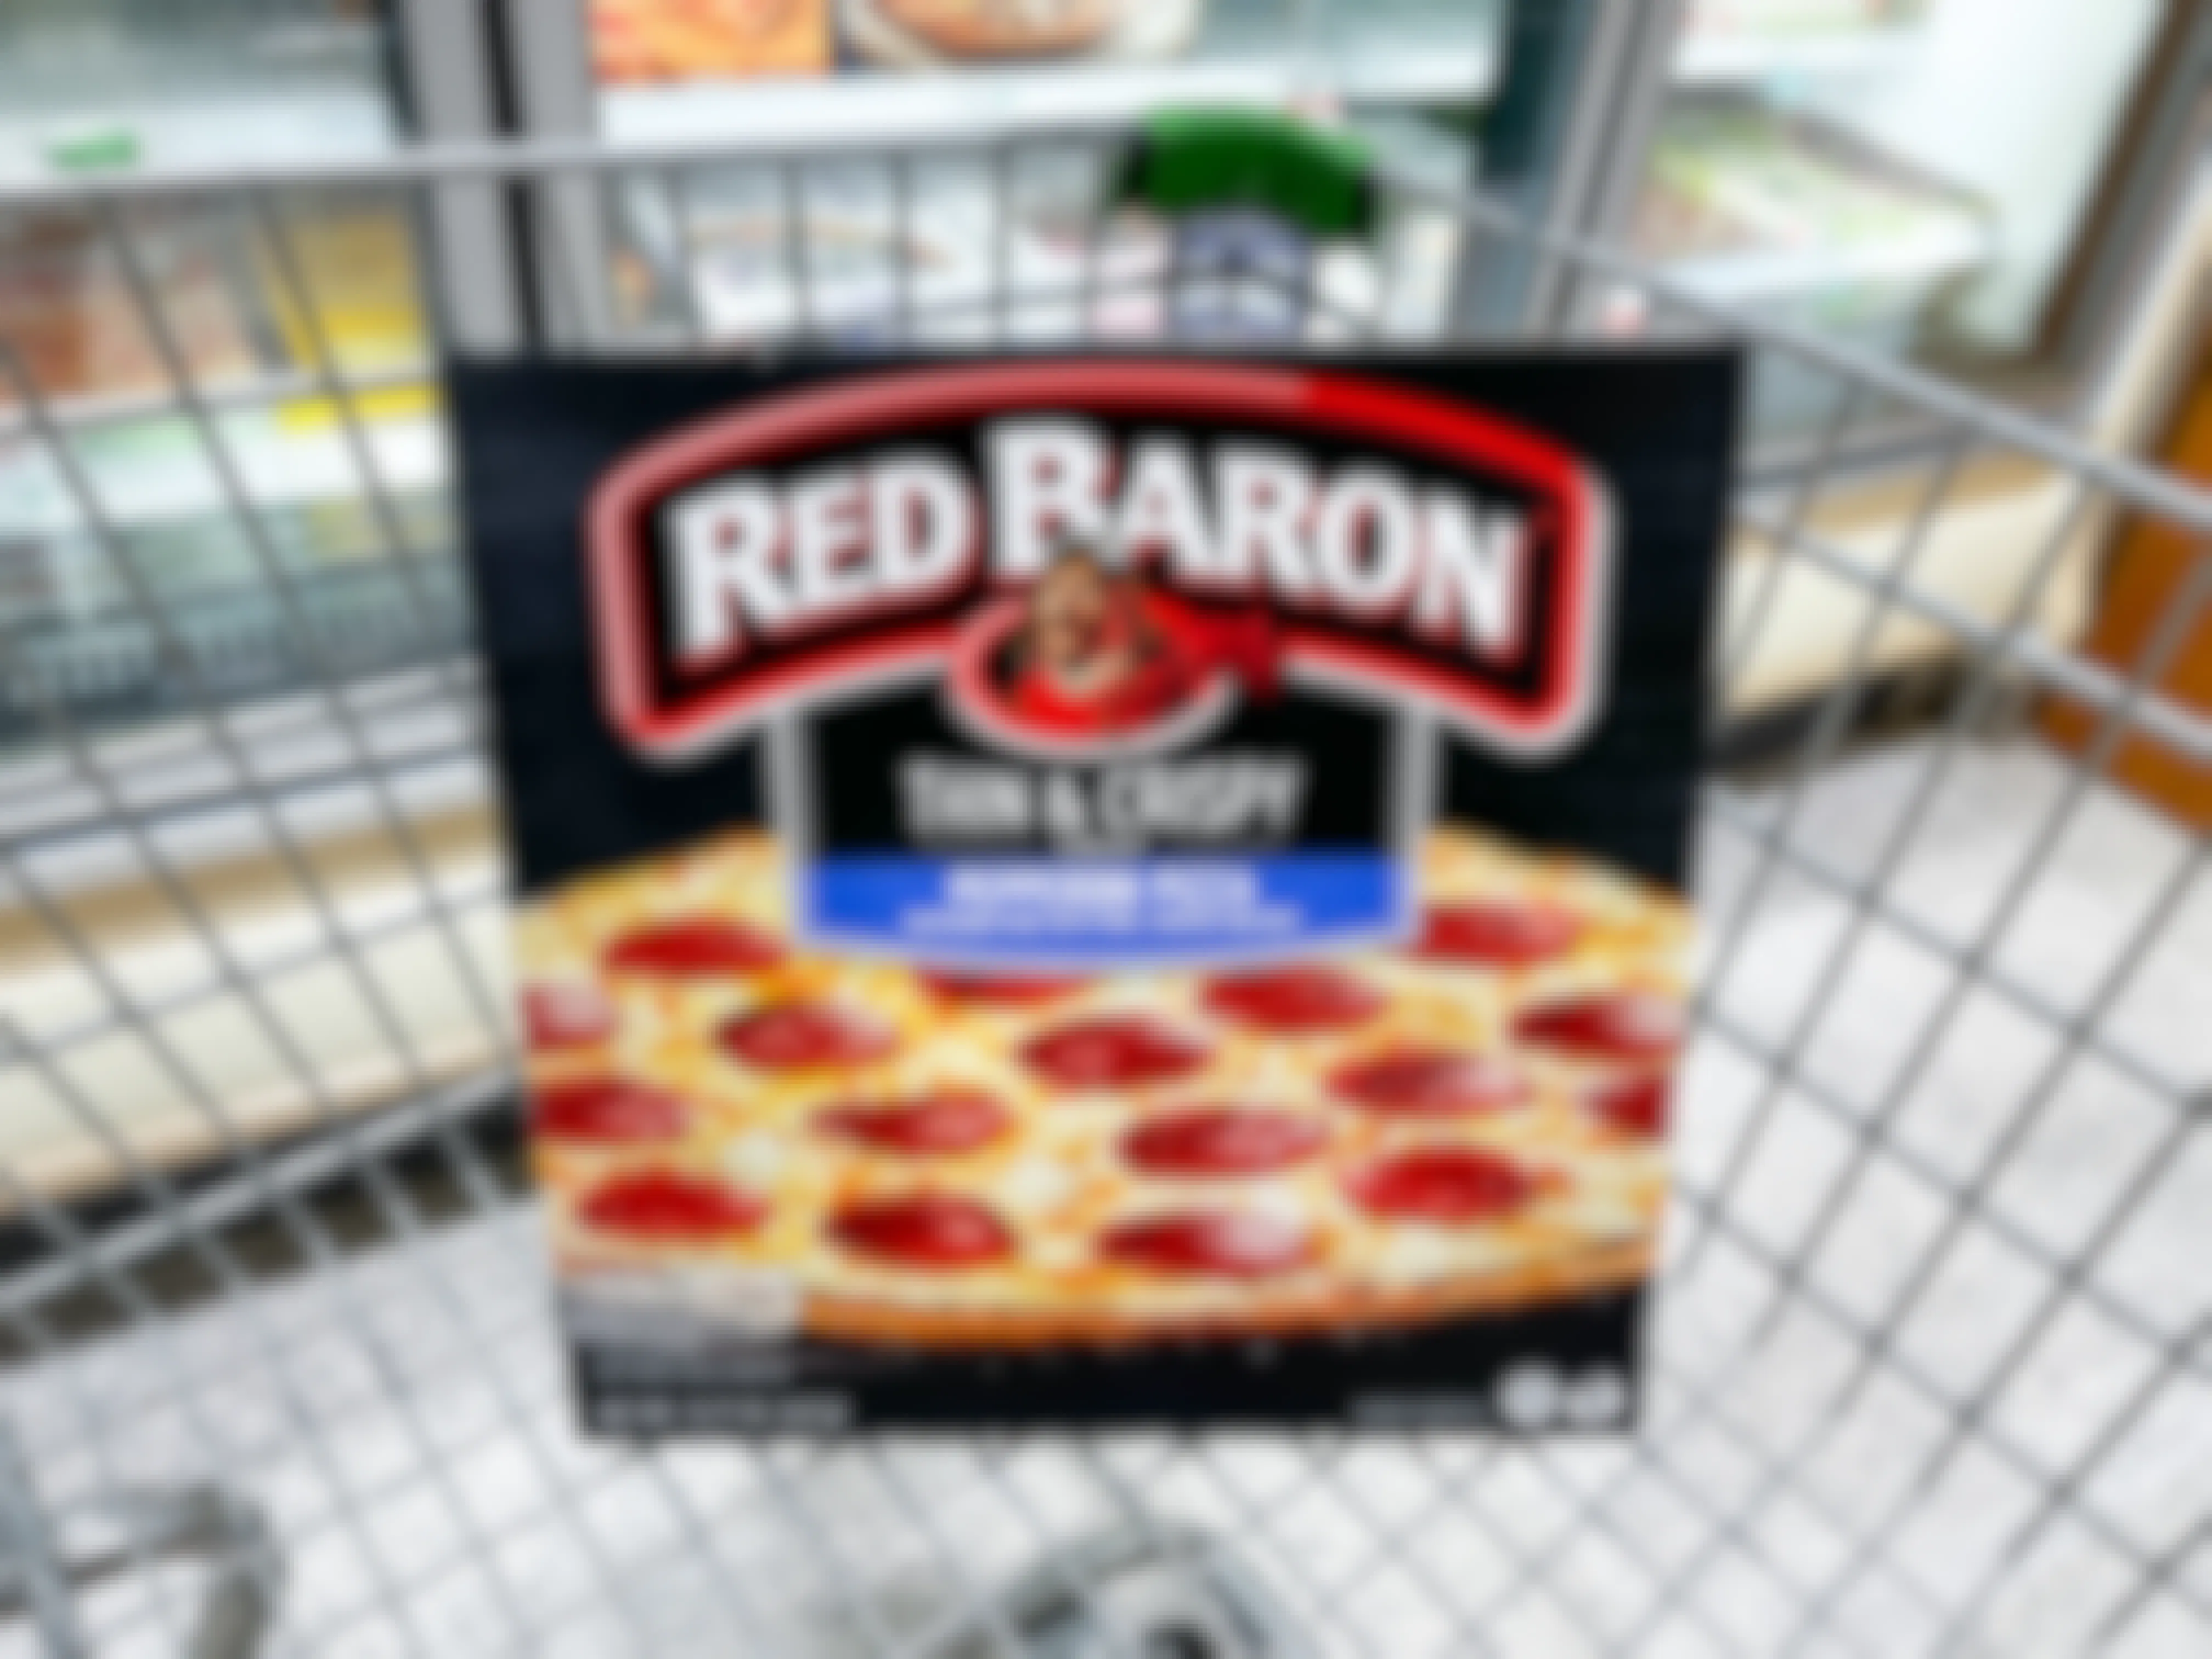 a red baron pizza in a cart